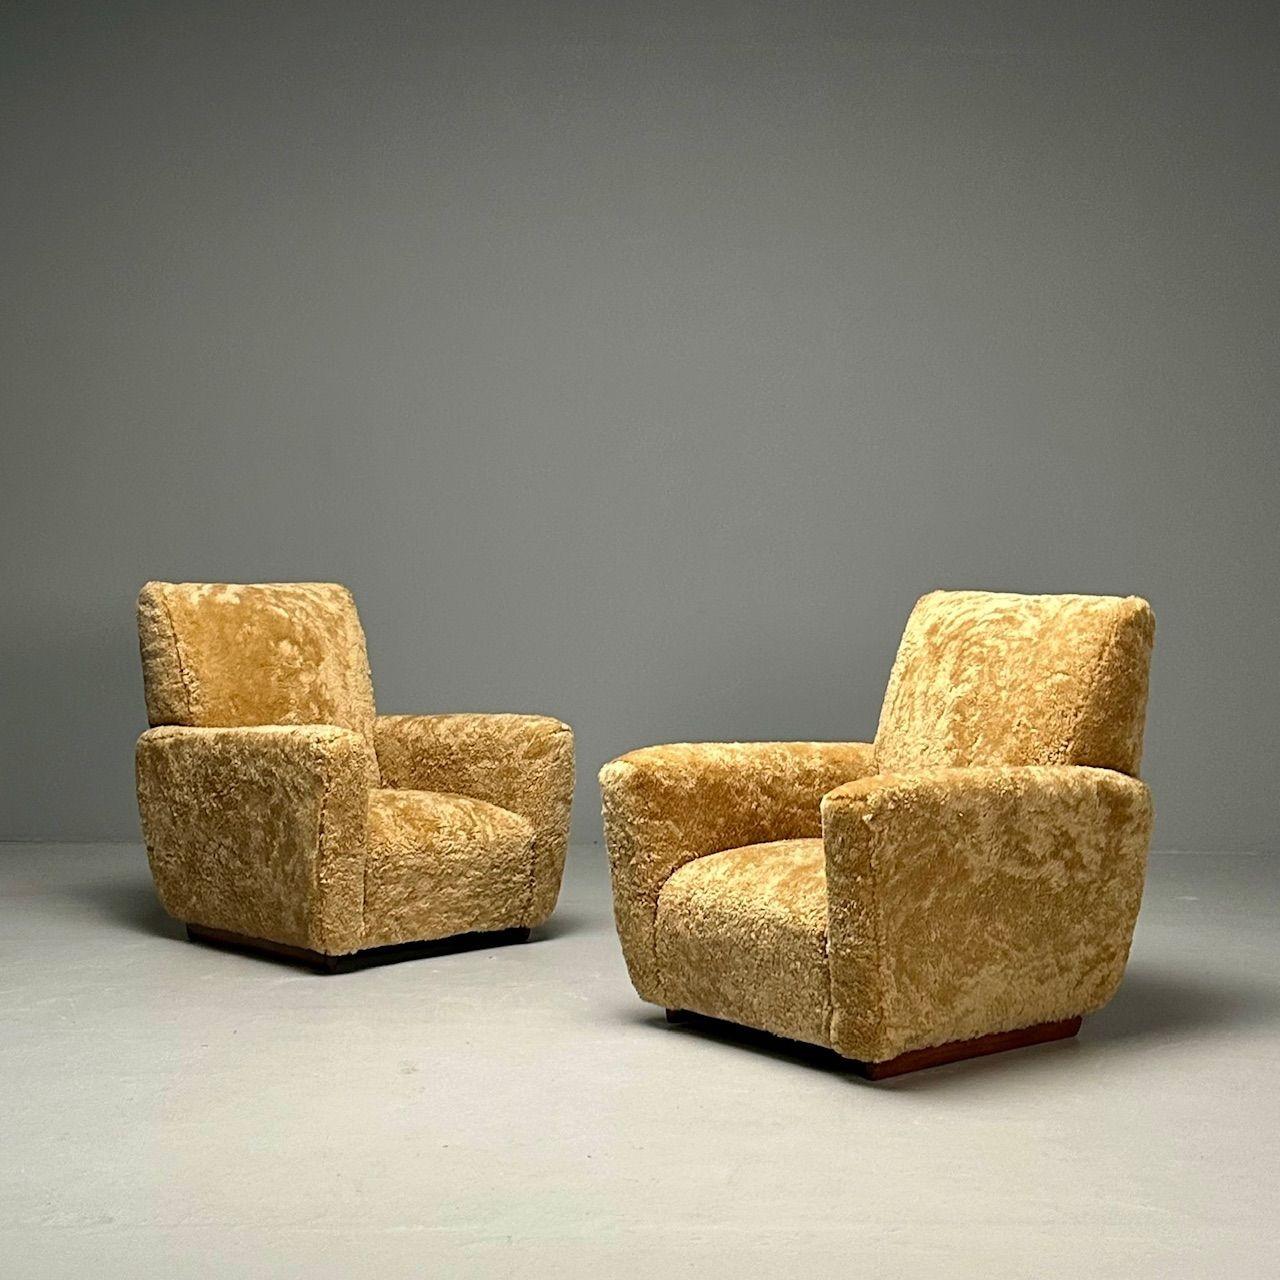 Guglielmo Ulrich Attribution, Italian Mid-Century Modern, Sheepskin Lounge Chairs, Shearling, Walnut, Italy, 1950s
 
Pair of lounge chairs attributed to Guglielmo Ulrich (1904-1977) and produced in Italy circa 1950s. These low profile club or lounge